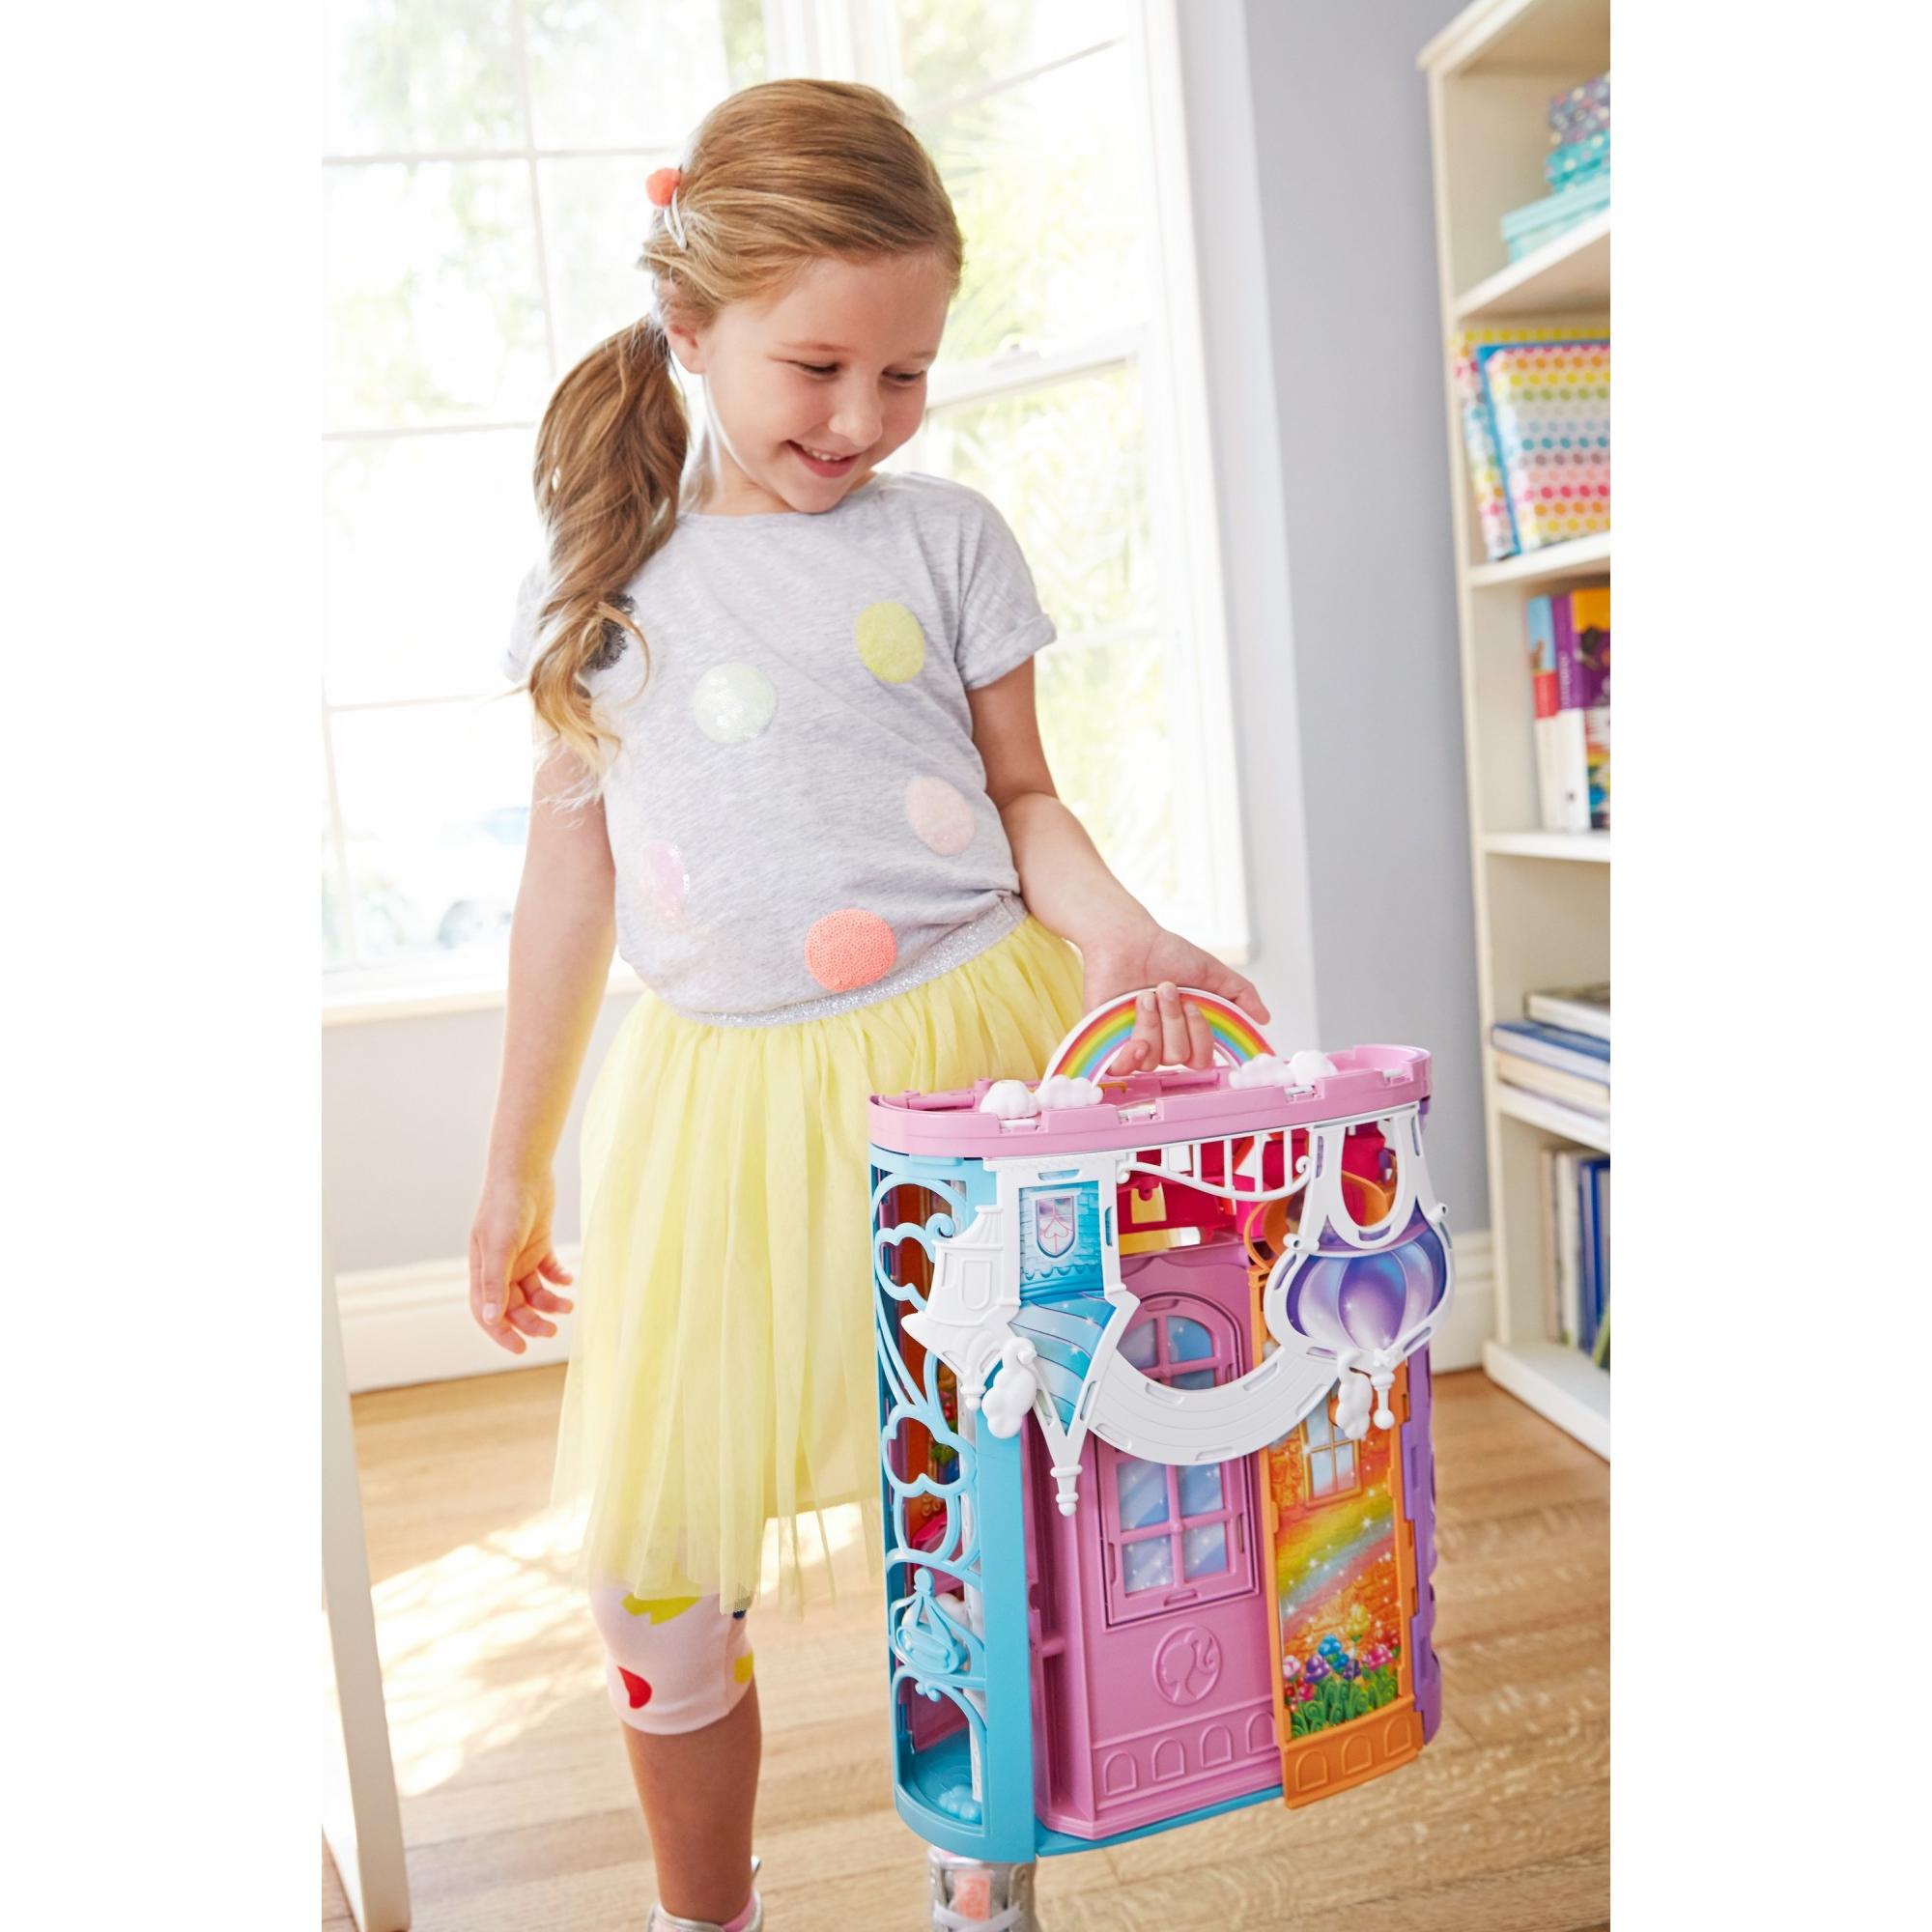 Barbie Dreamtopia Castle Portable Playset with Transforming Features - image 5 of 22